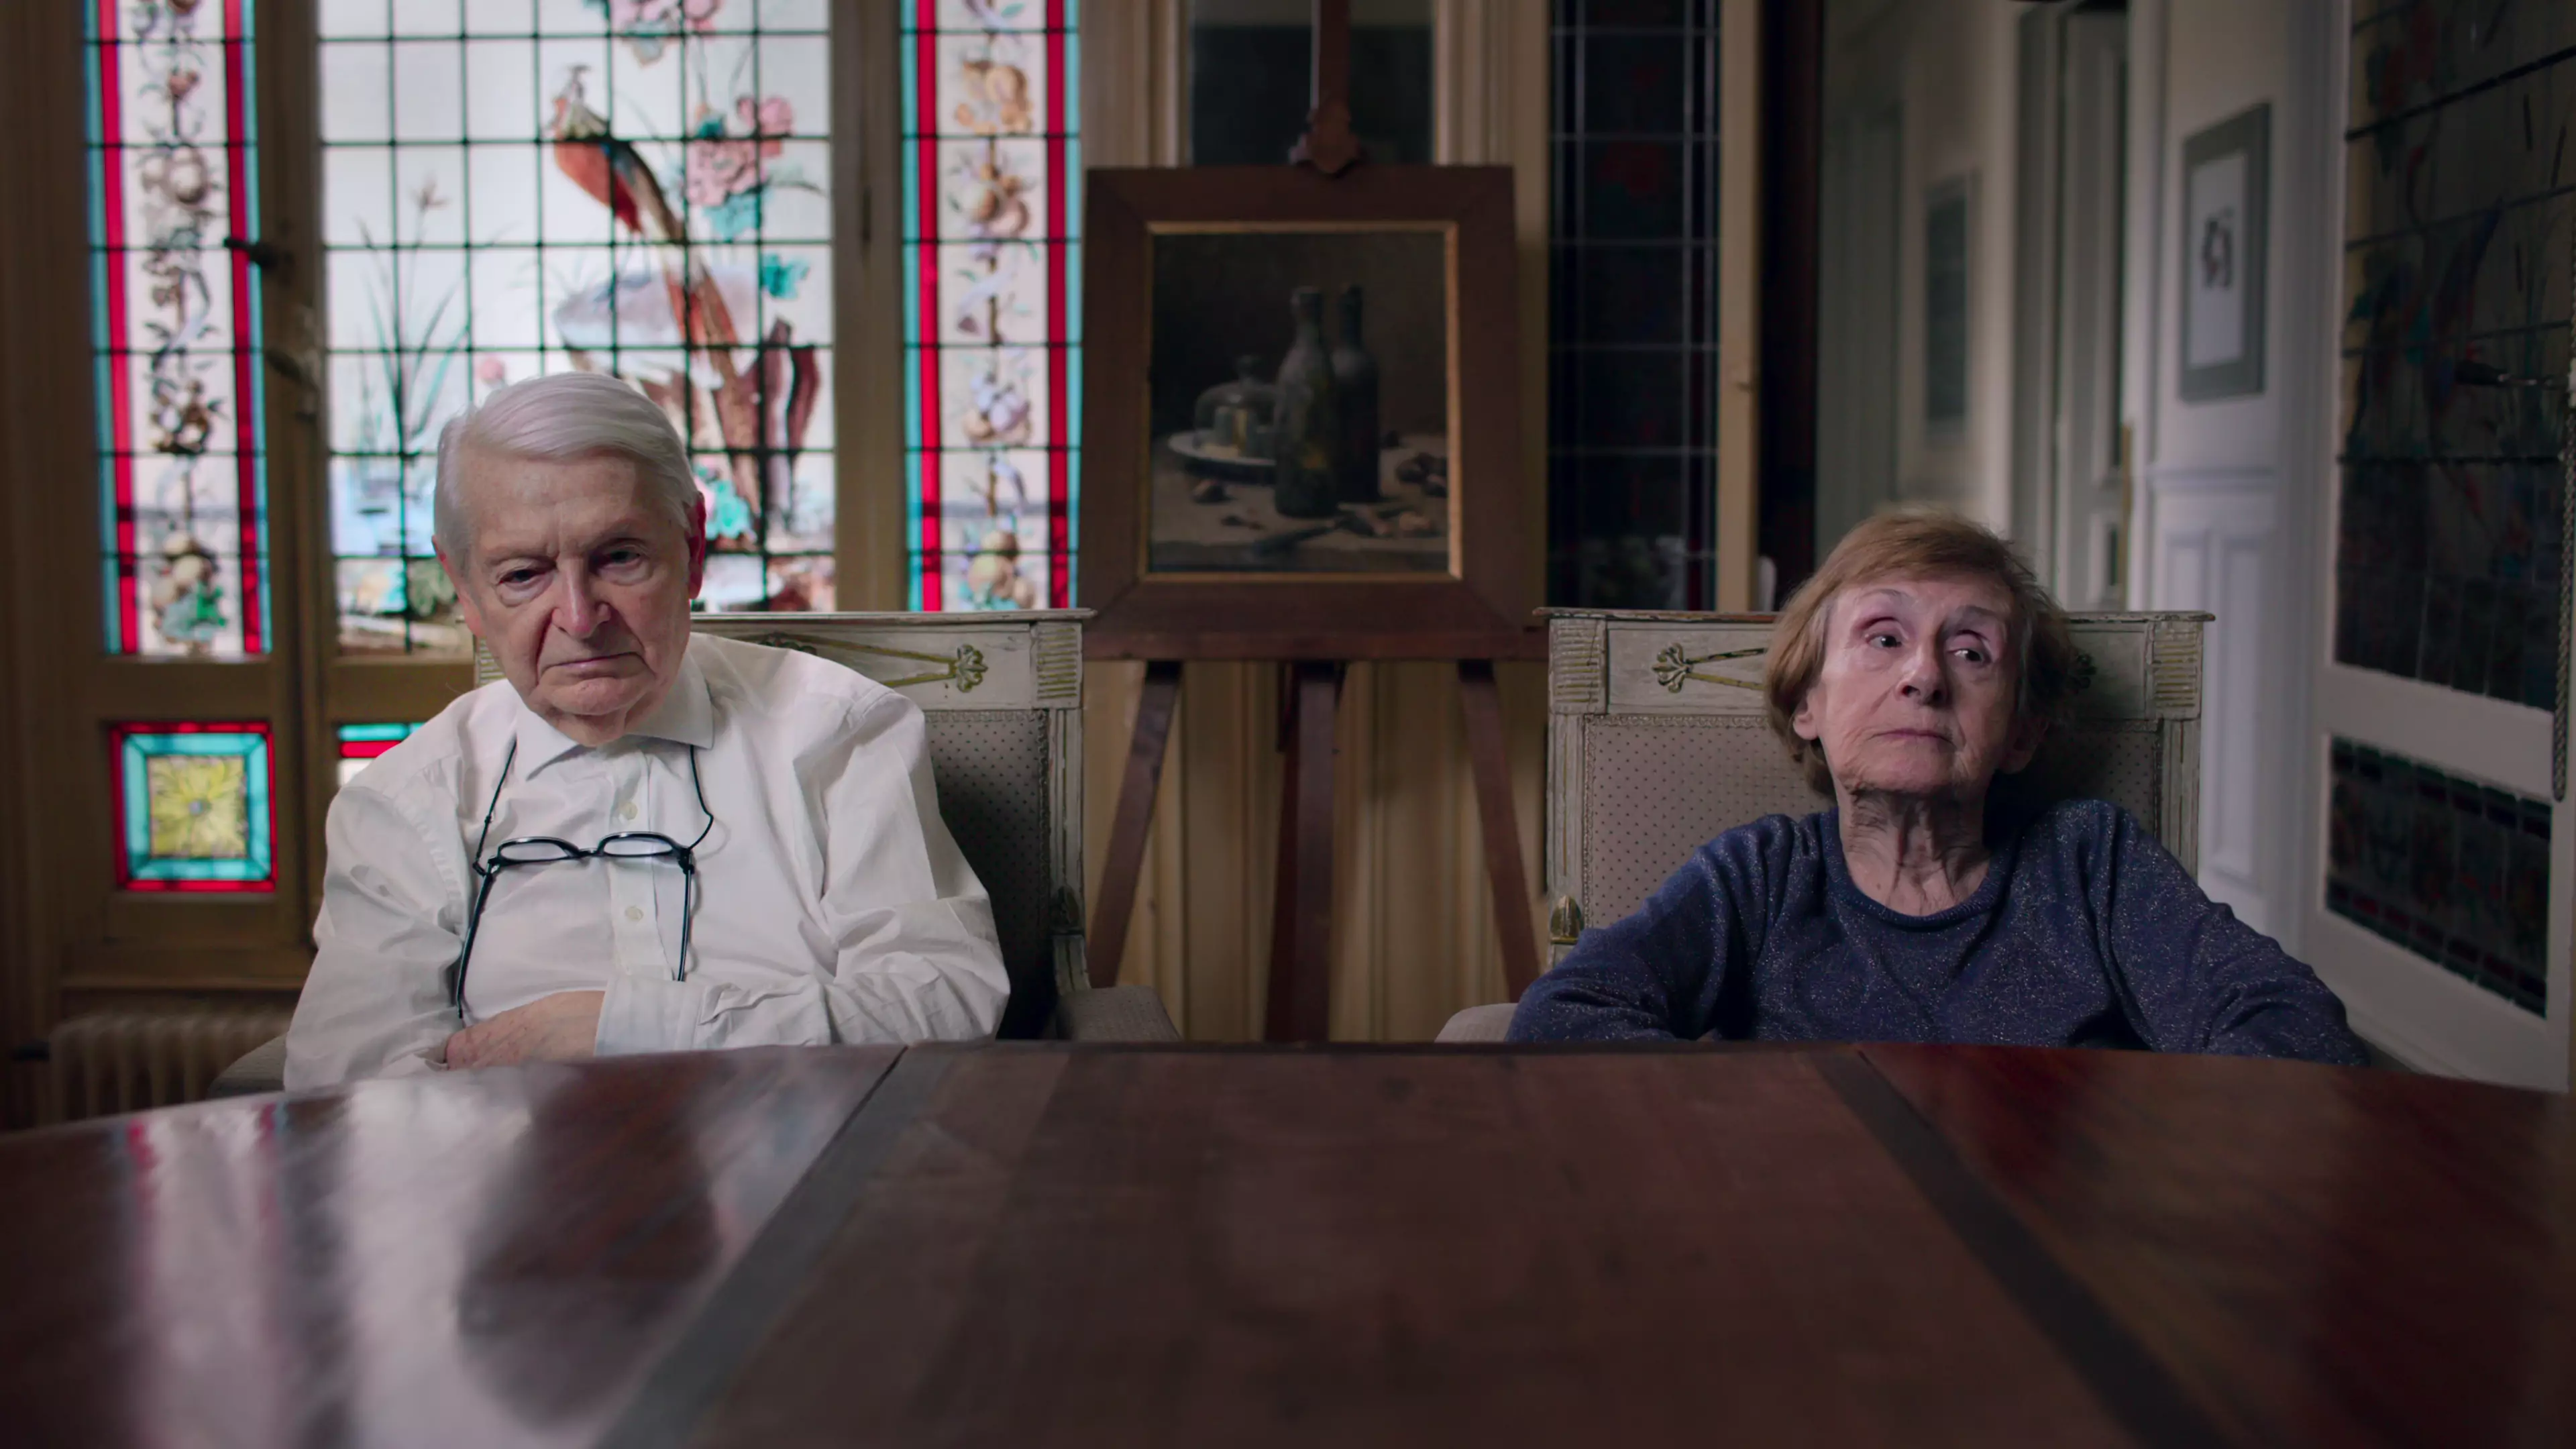 Sophie's parents George and Marguerite Bouniol are interviewed for the documentary (